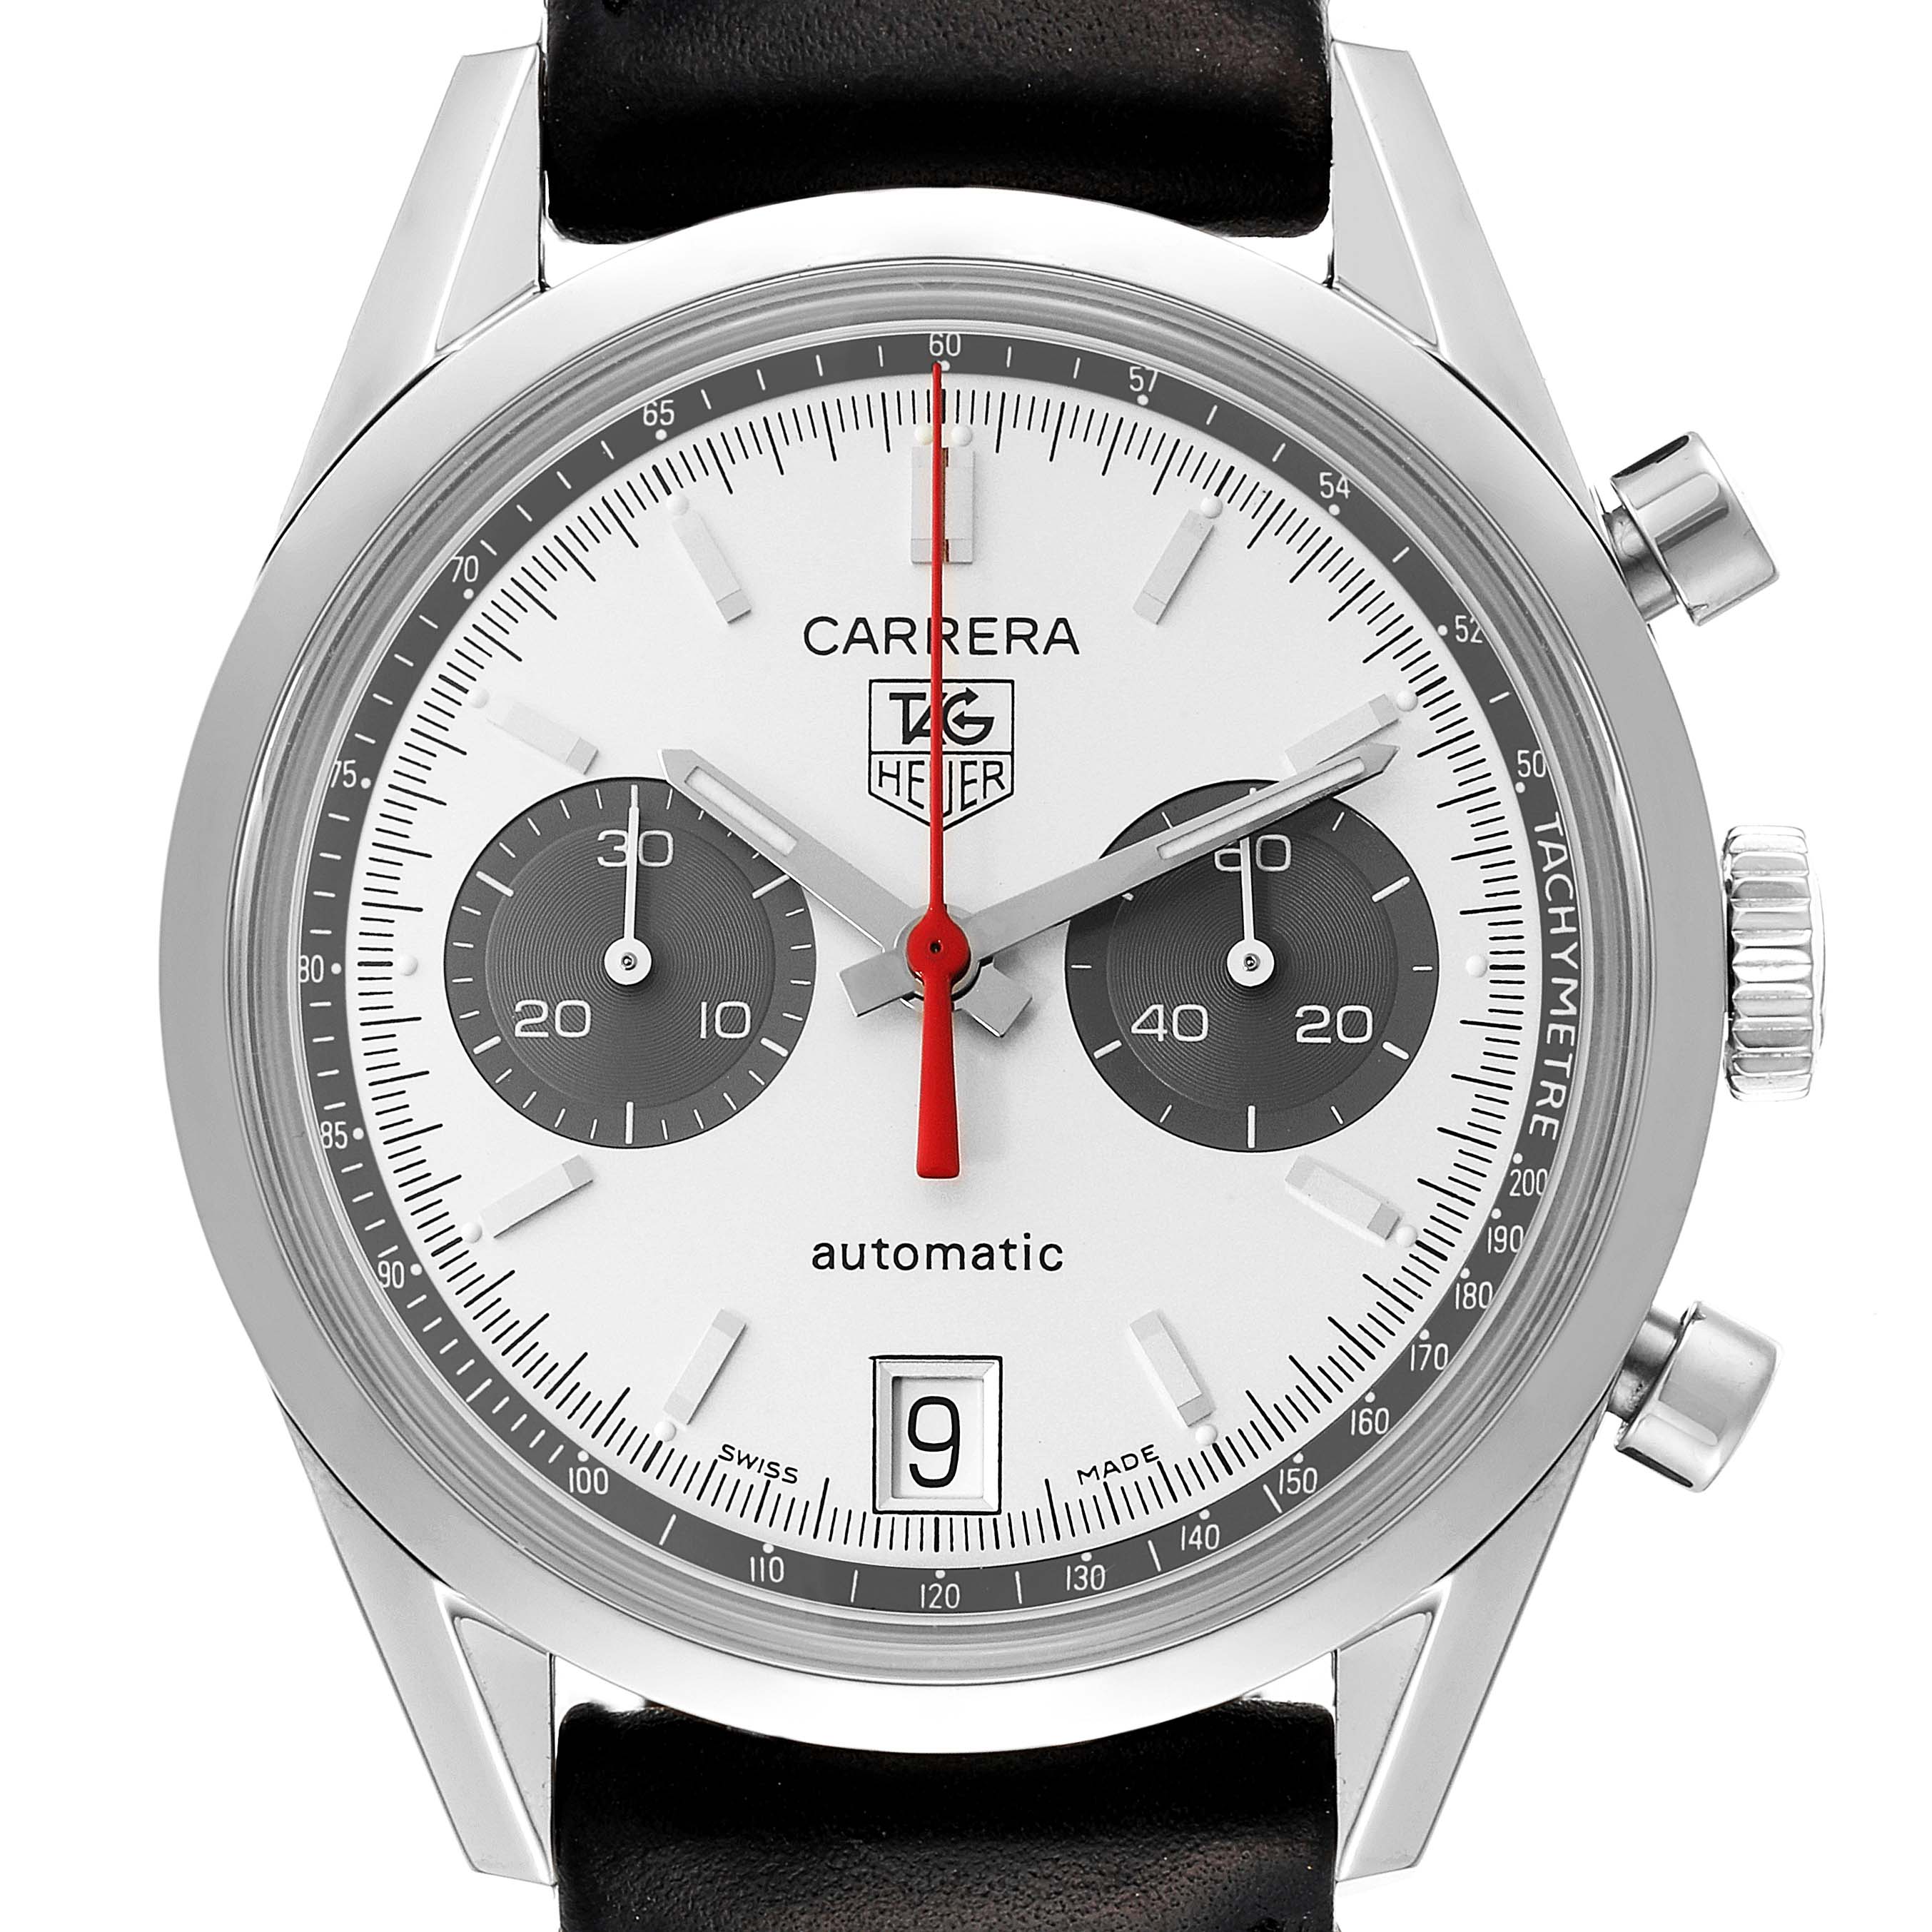 Tag Heuer Carrera Chronograph Limited Edition Steel Mens Watch CV2117 |  SwissWatchExpo